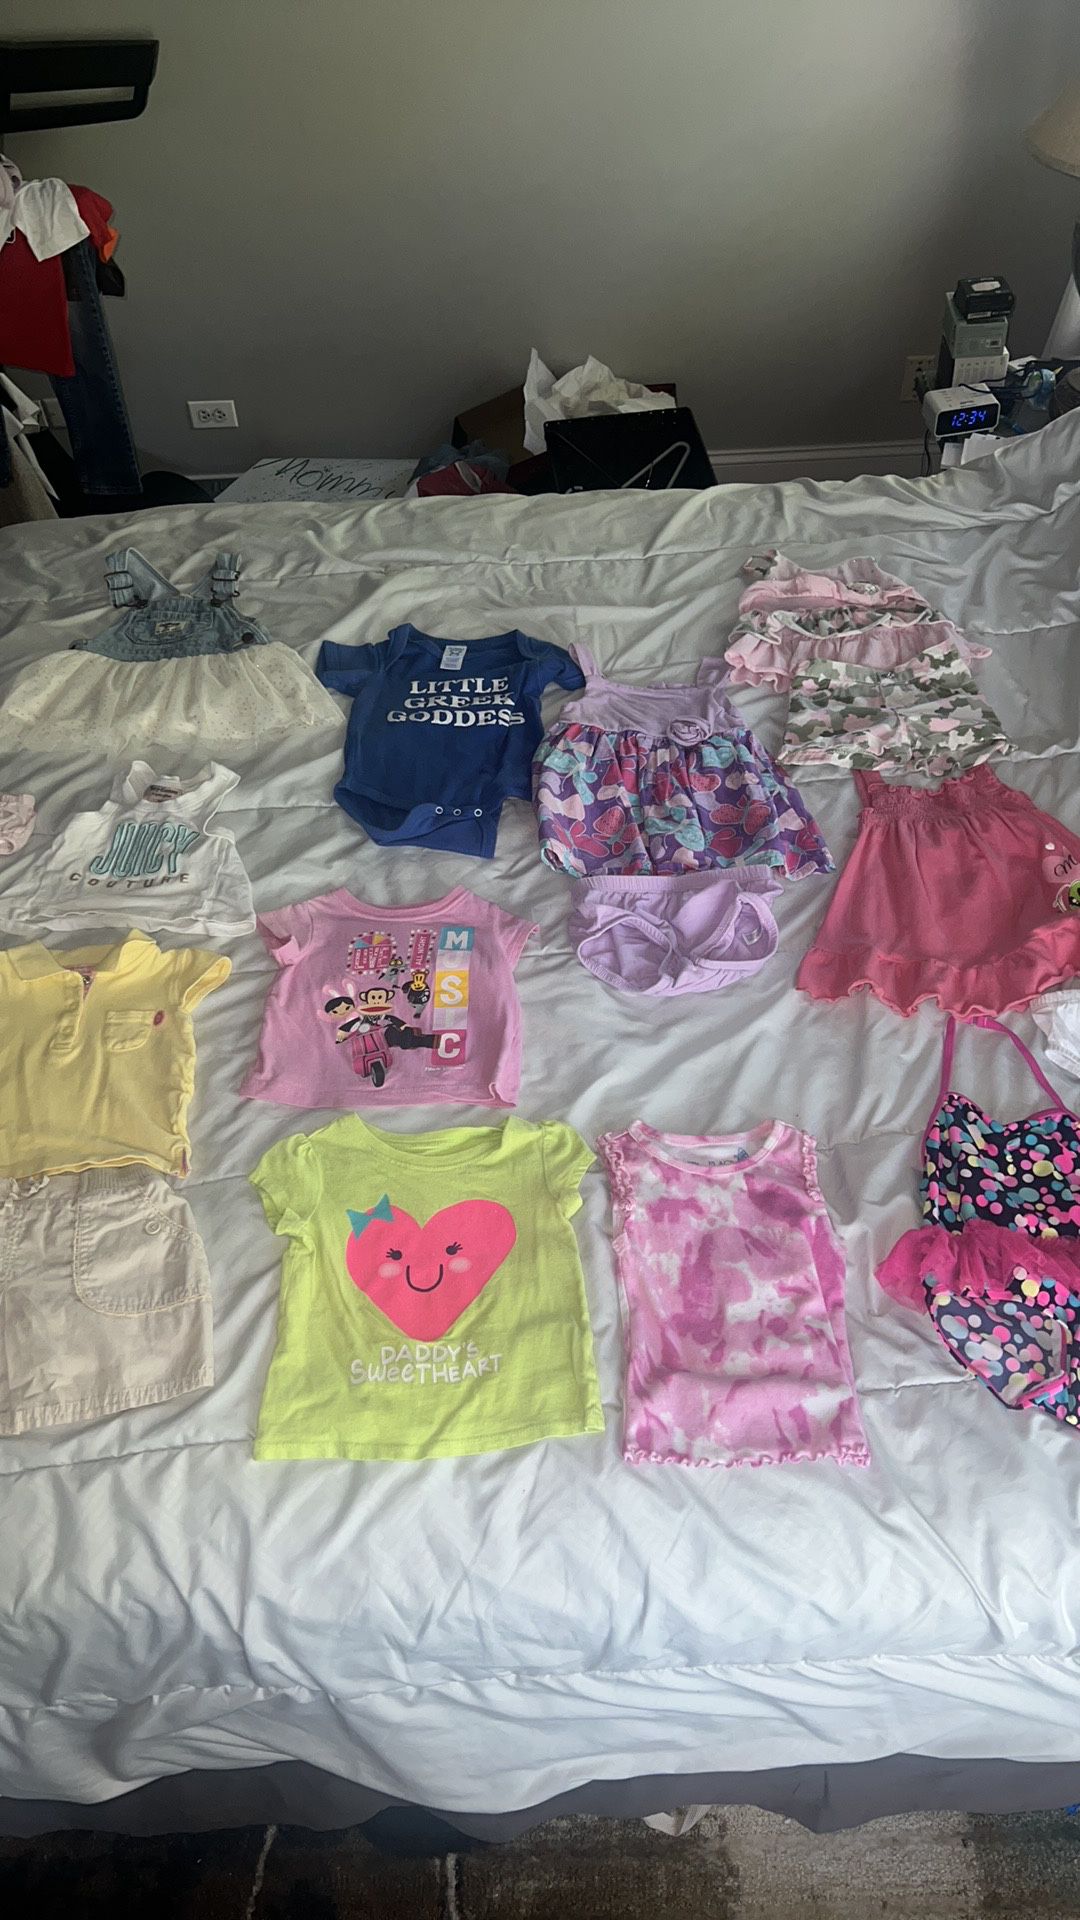 Baby girl clothes 12-18 months. Some have light stains - see pics. Koala bear purple diaper cover has stain. Lil Lass camo shirt has stain. Children’s